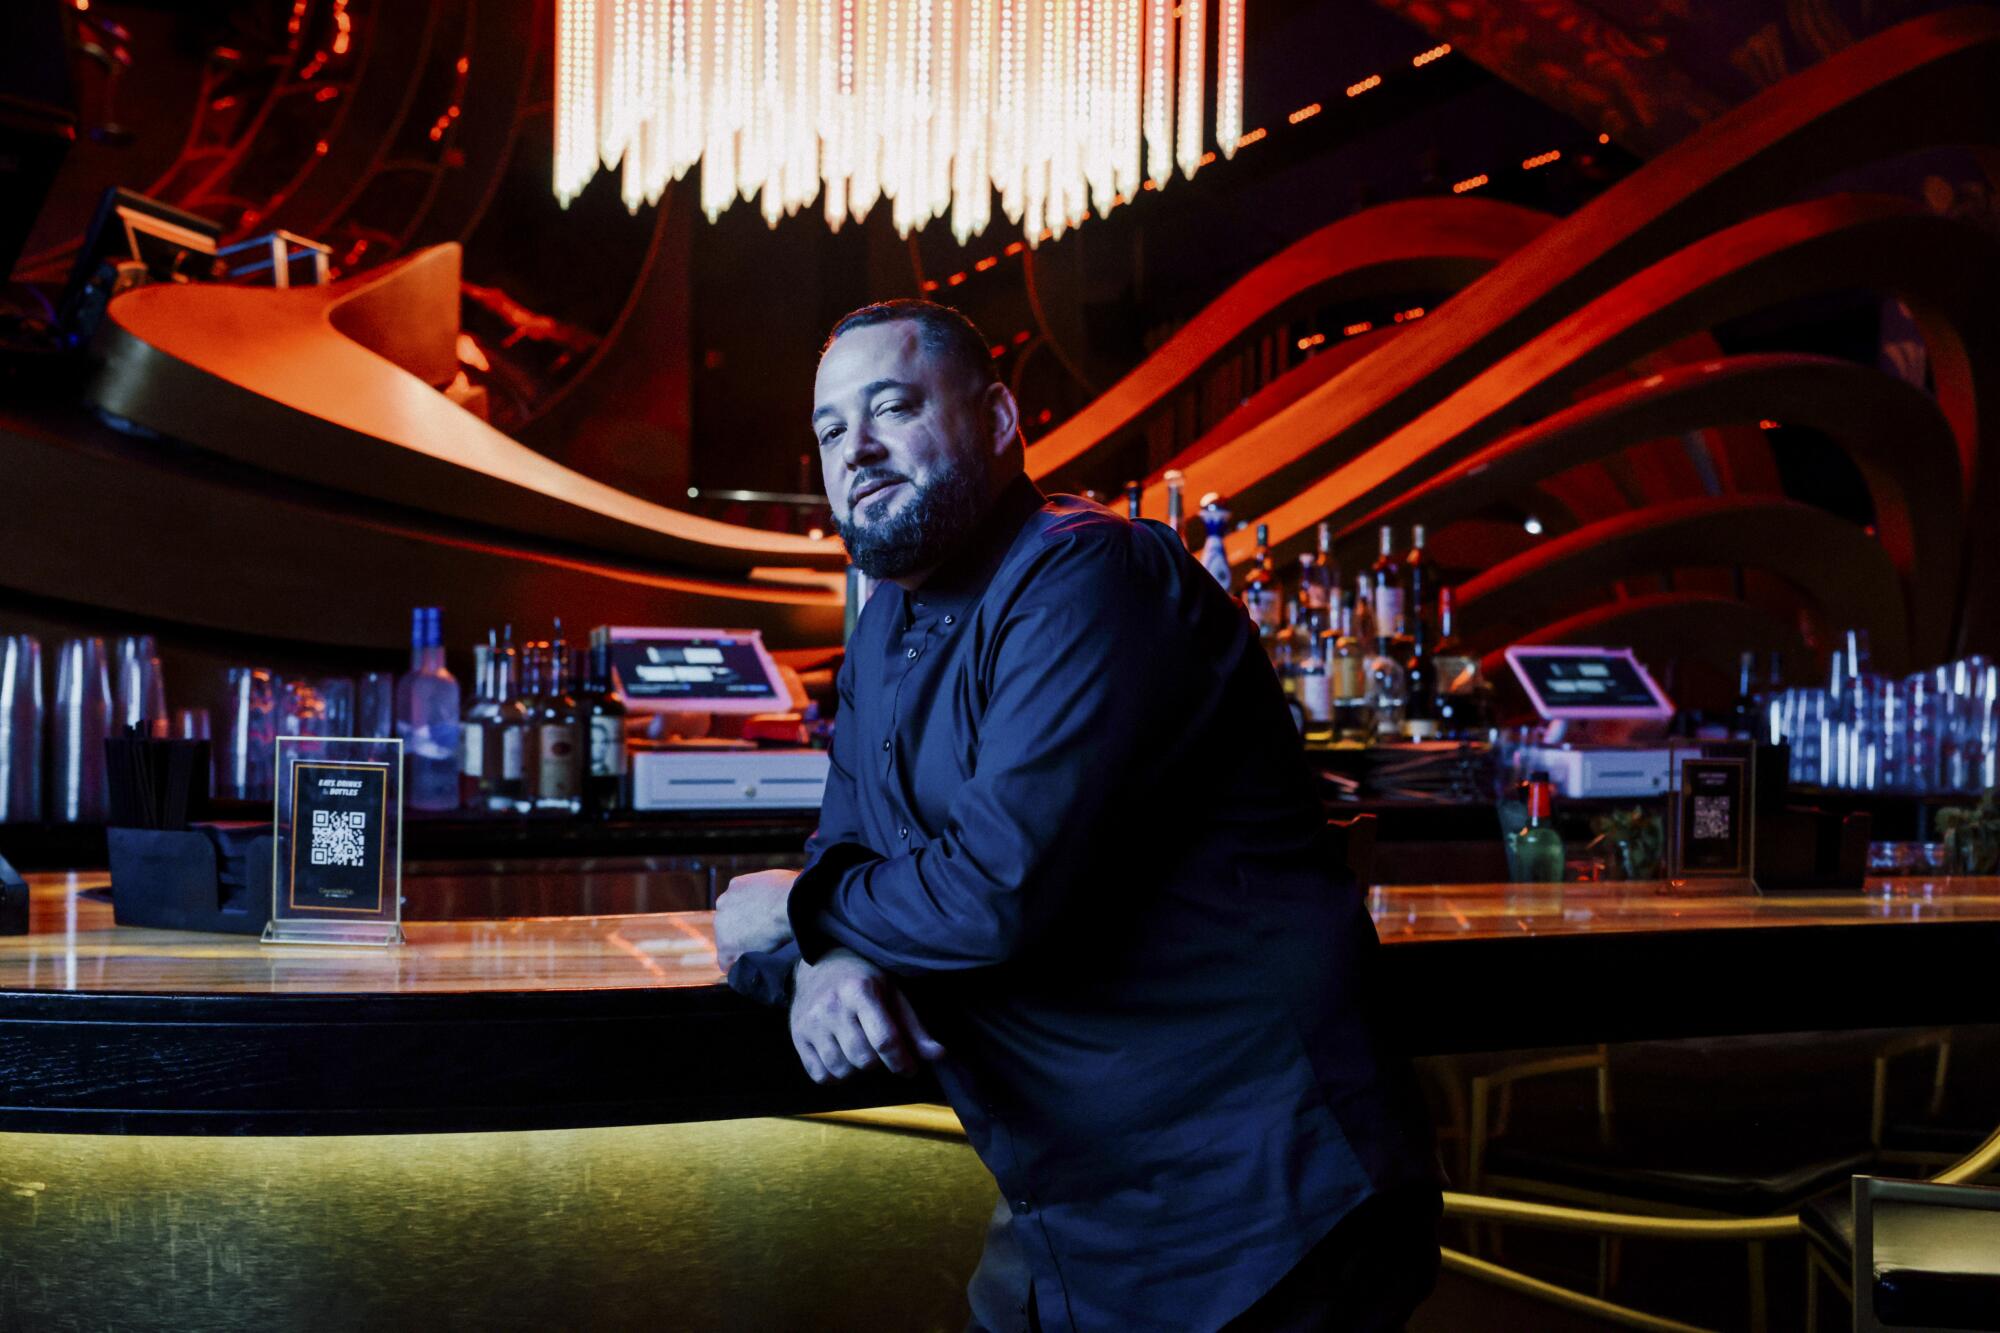 Jesse Saenz leans against the bar at the nightclub inside the Miami Heat arena.